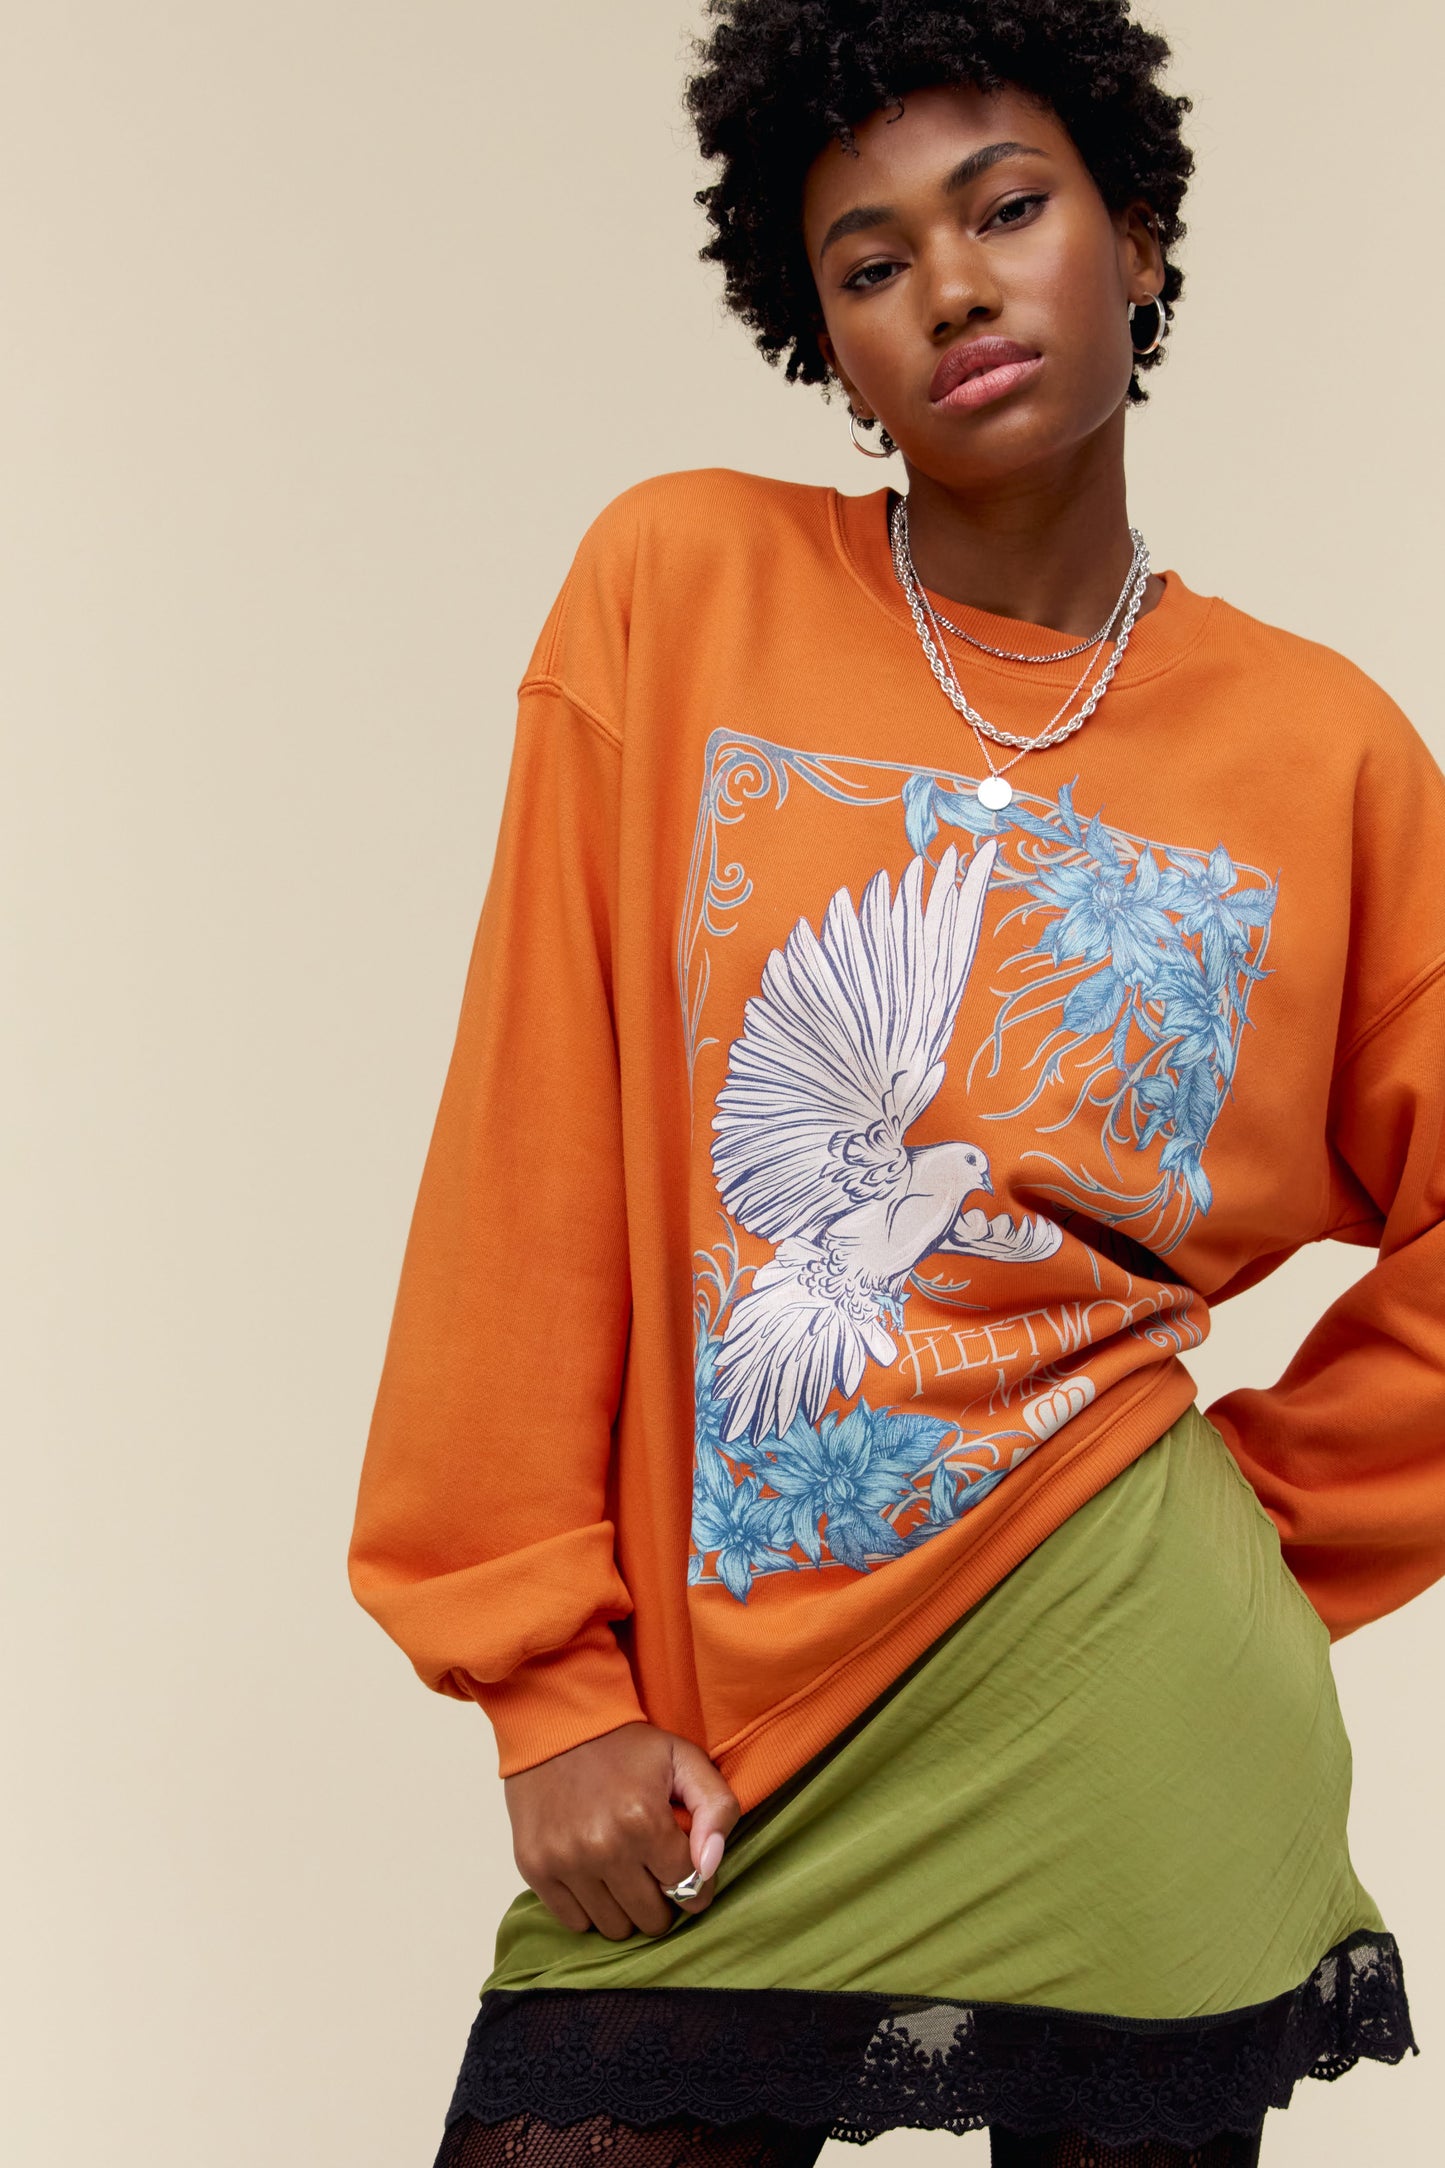 A model featuring a tangerine long sleeve designed with dove artwork - a symbol that’s become synonymous with the crew.